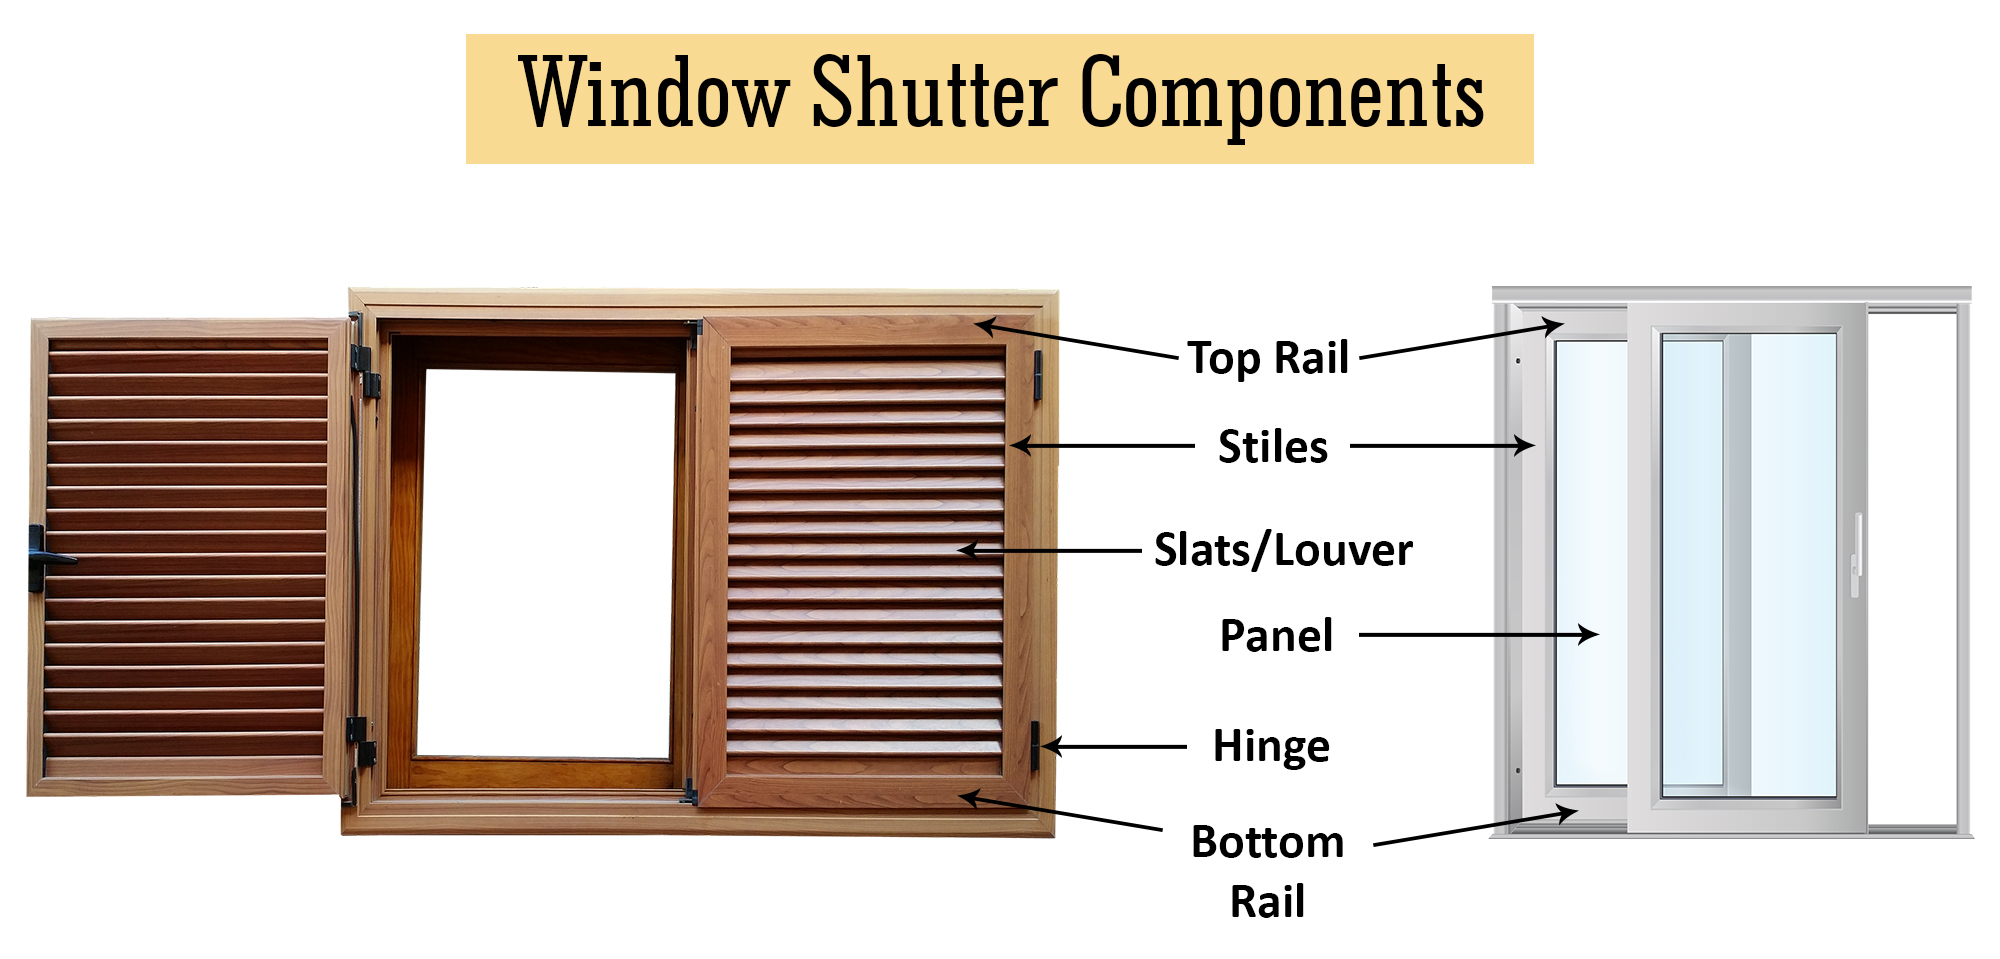 Components of Window Shutters